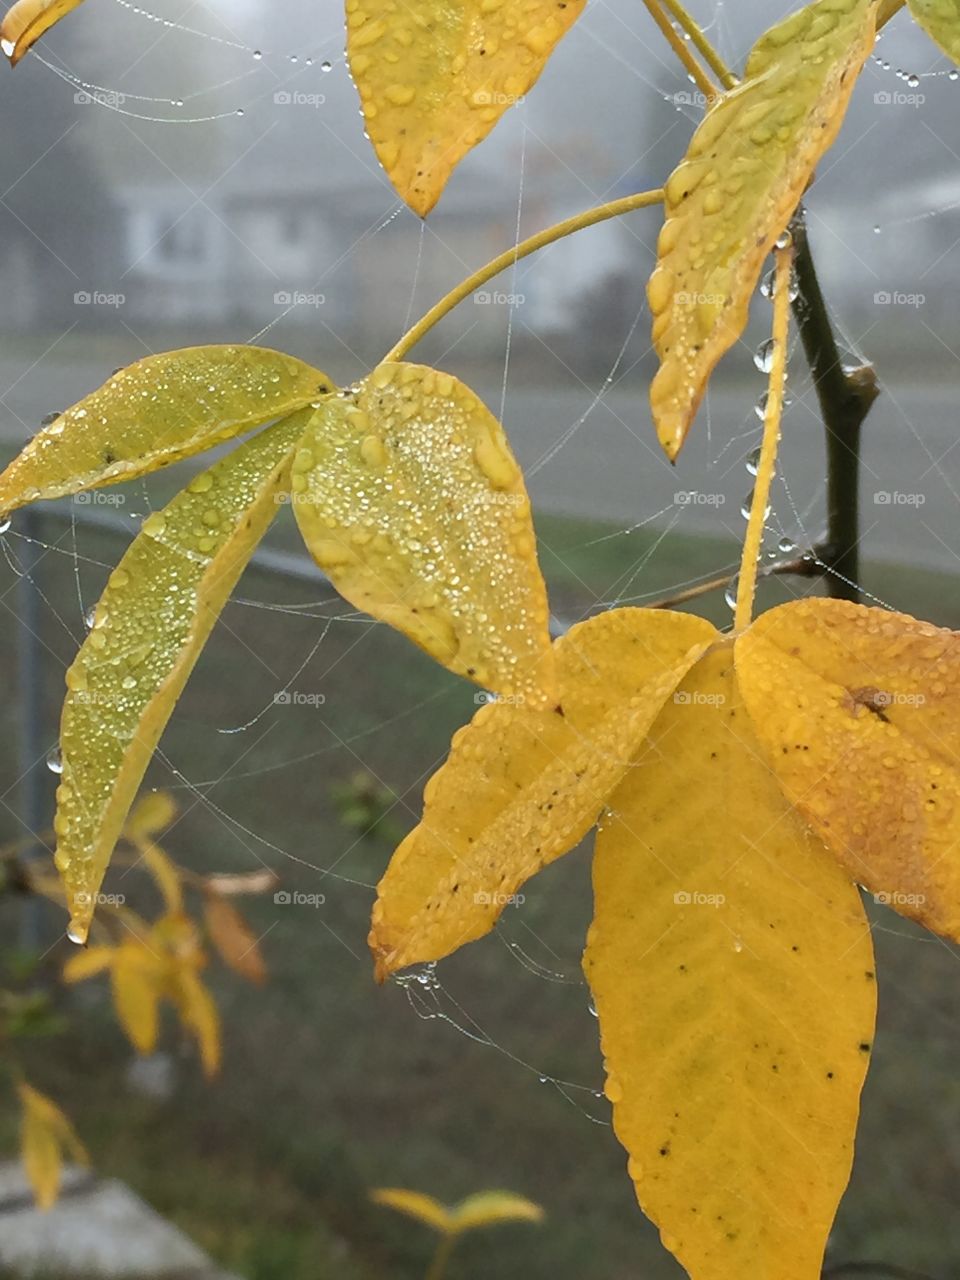 Spider webs and dew drops